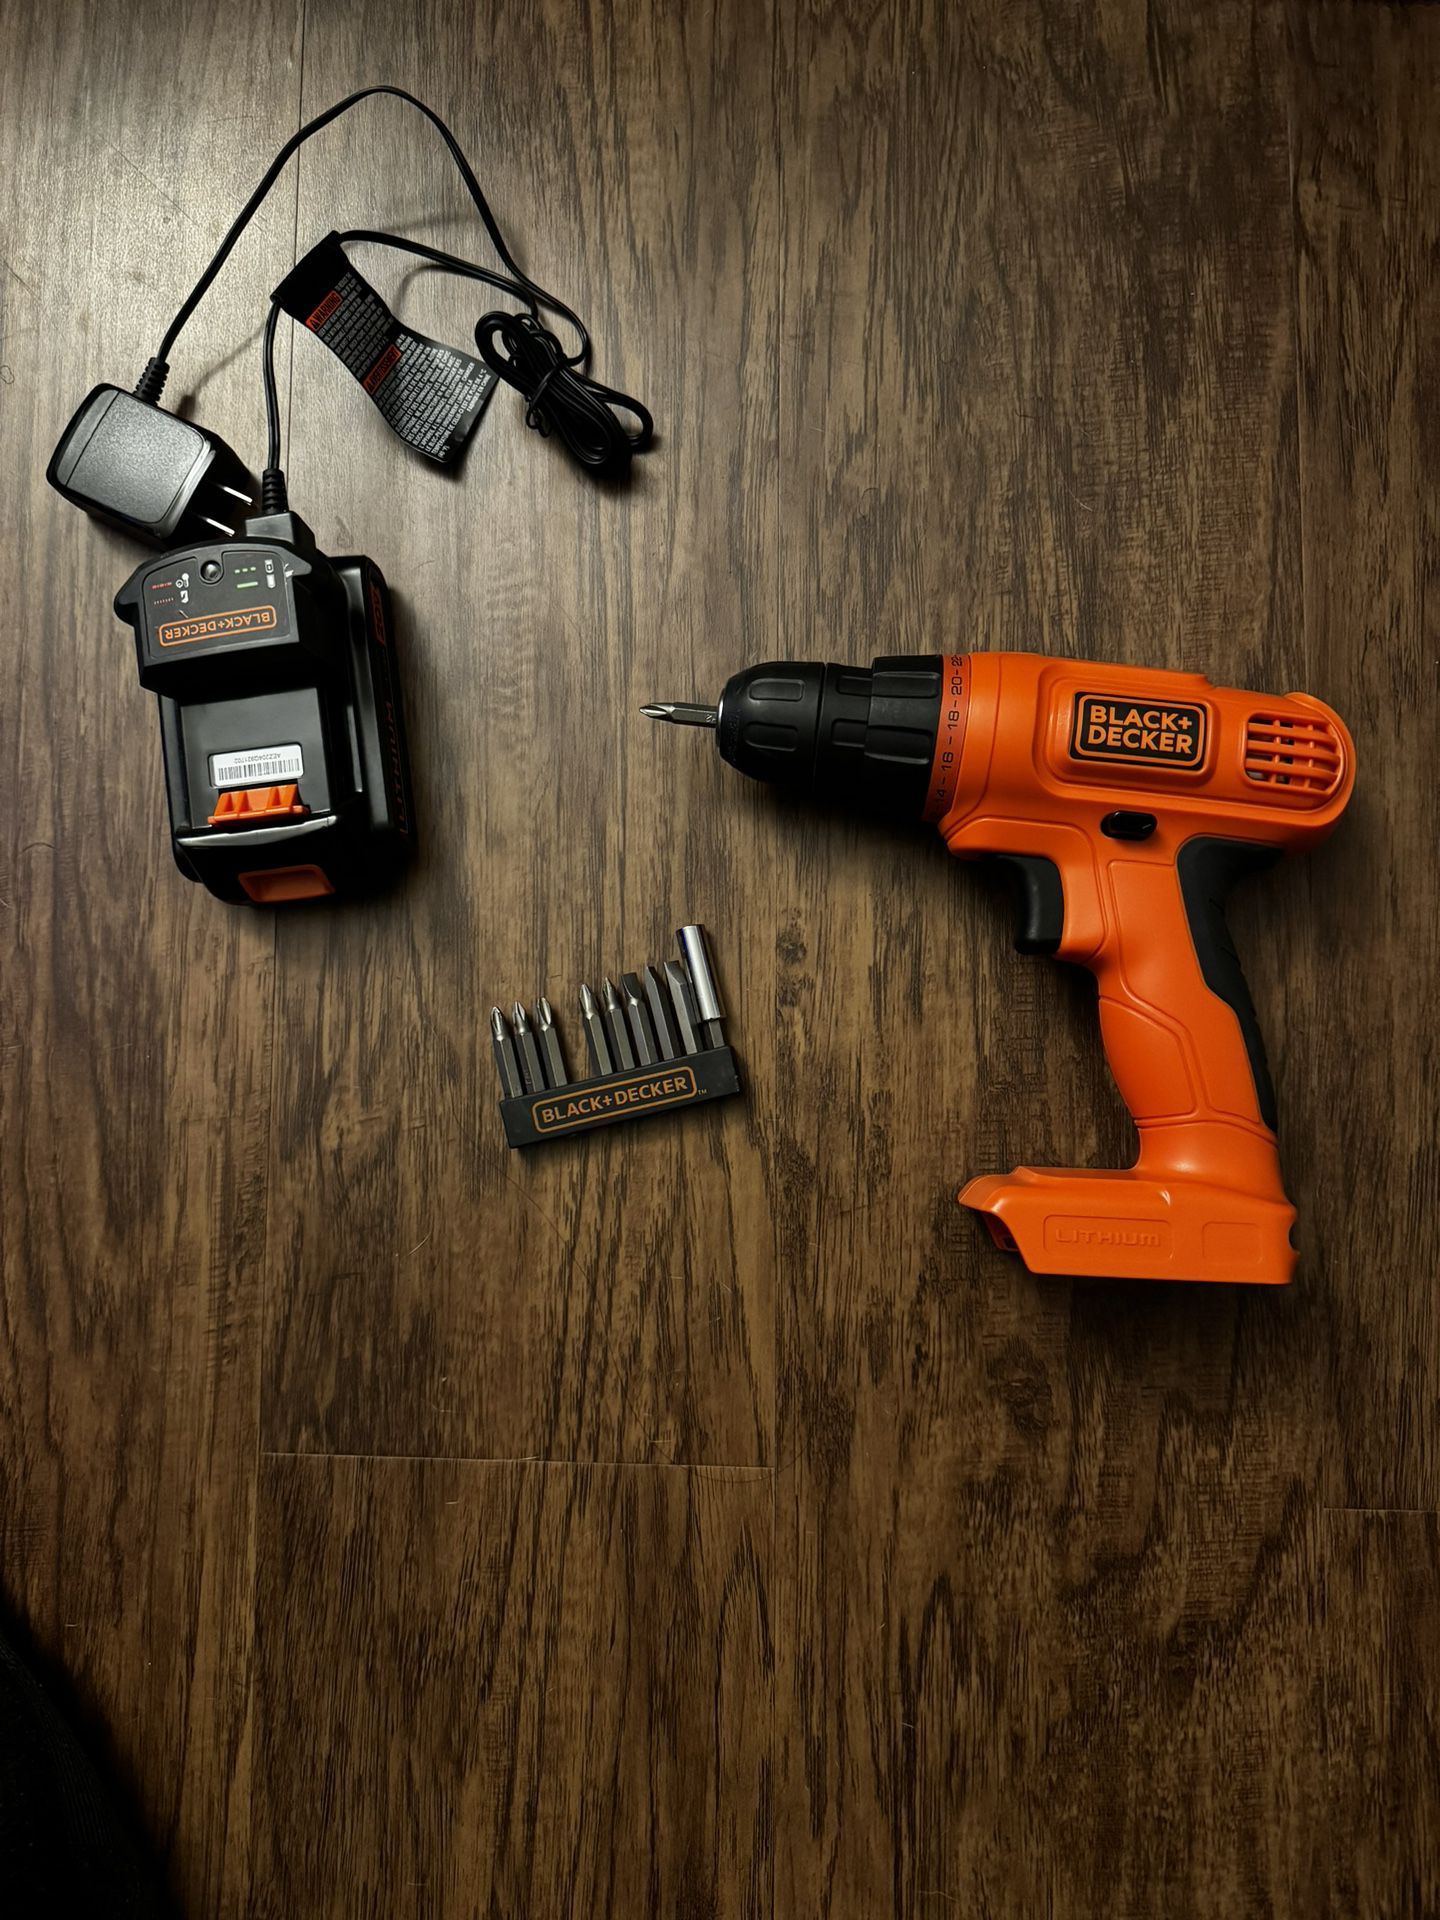 Black and Decker Drill and Driver